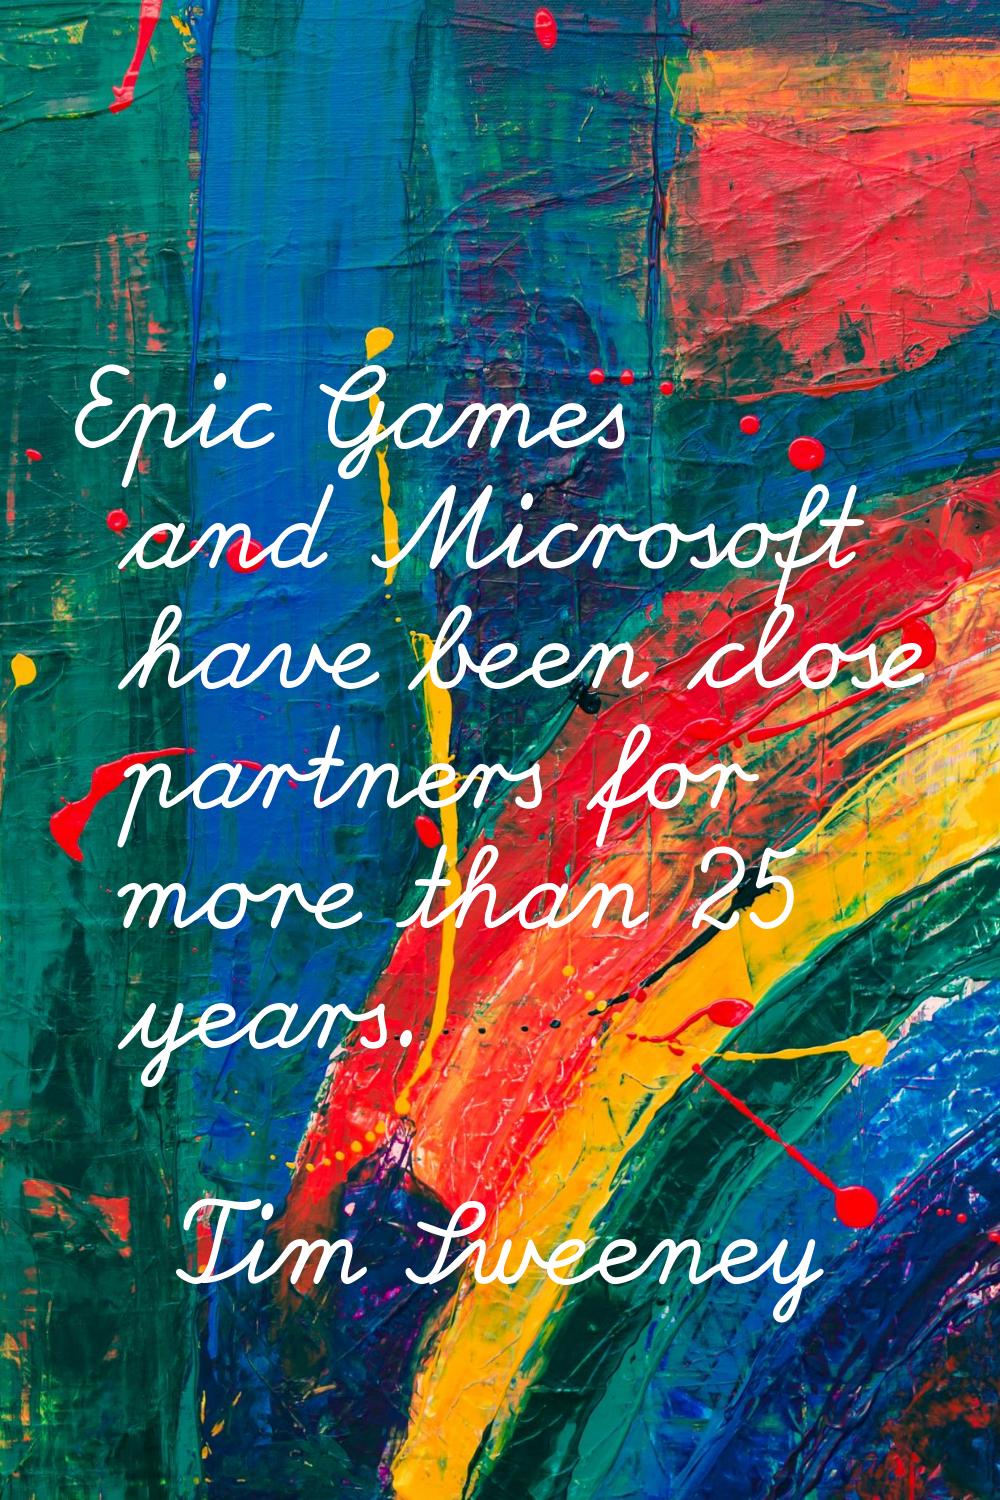 Epic Games and Microsoft have been close partners for more than 25 years.